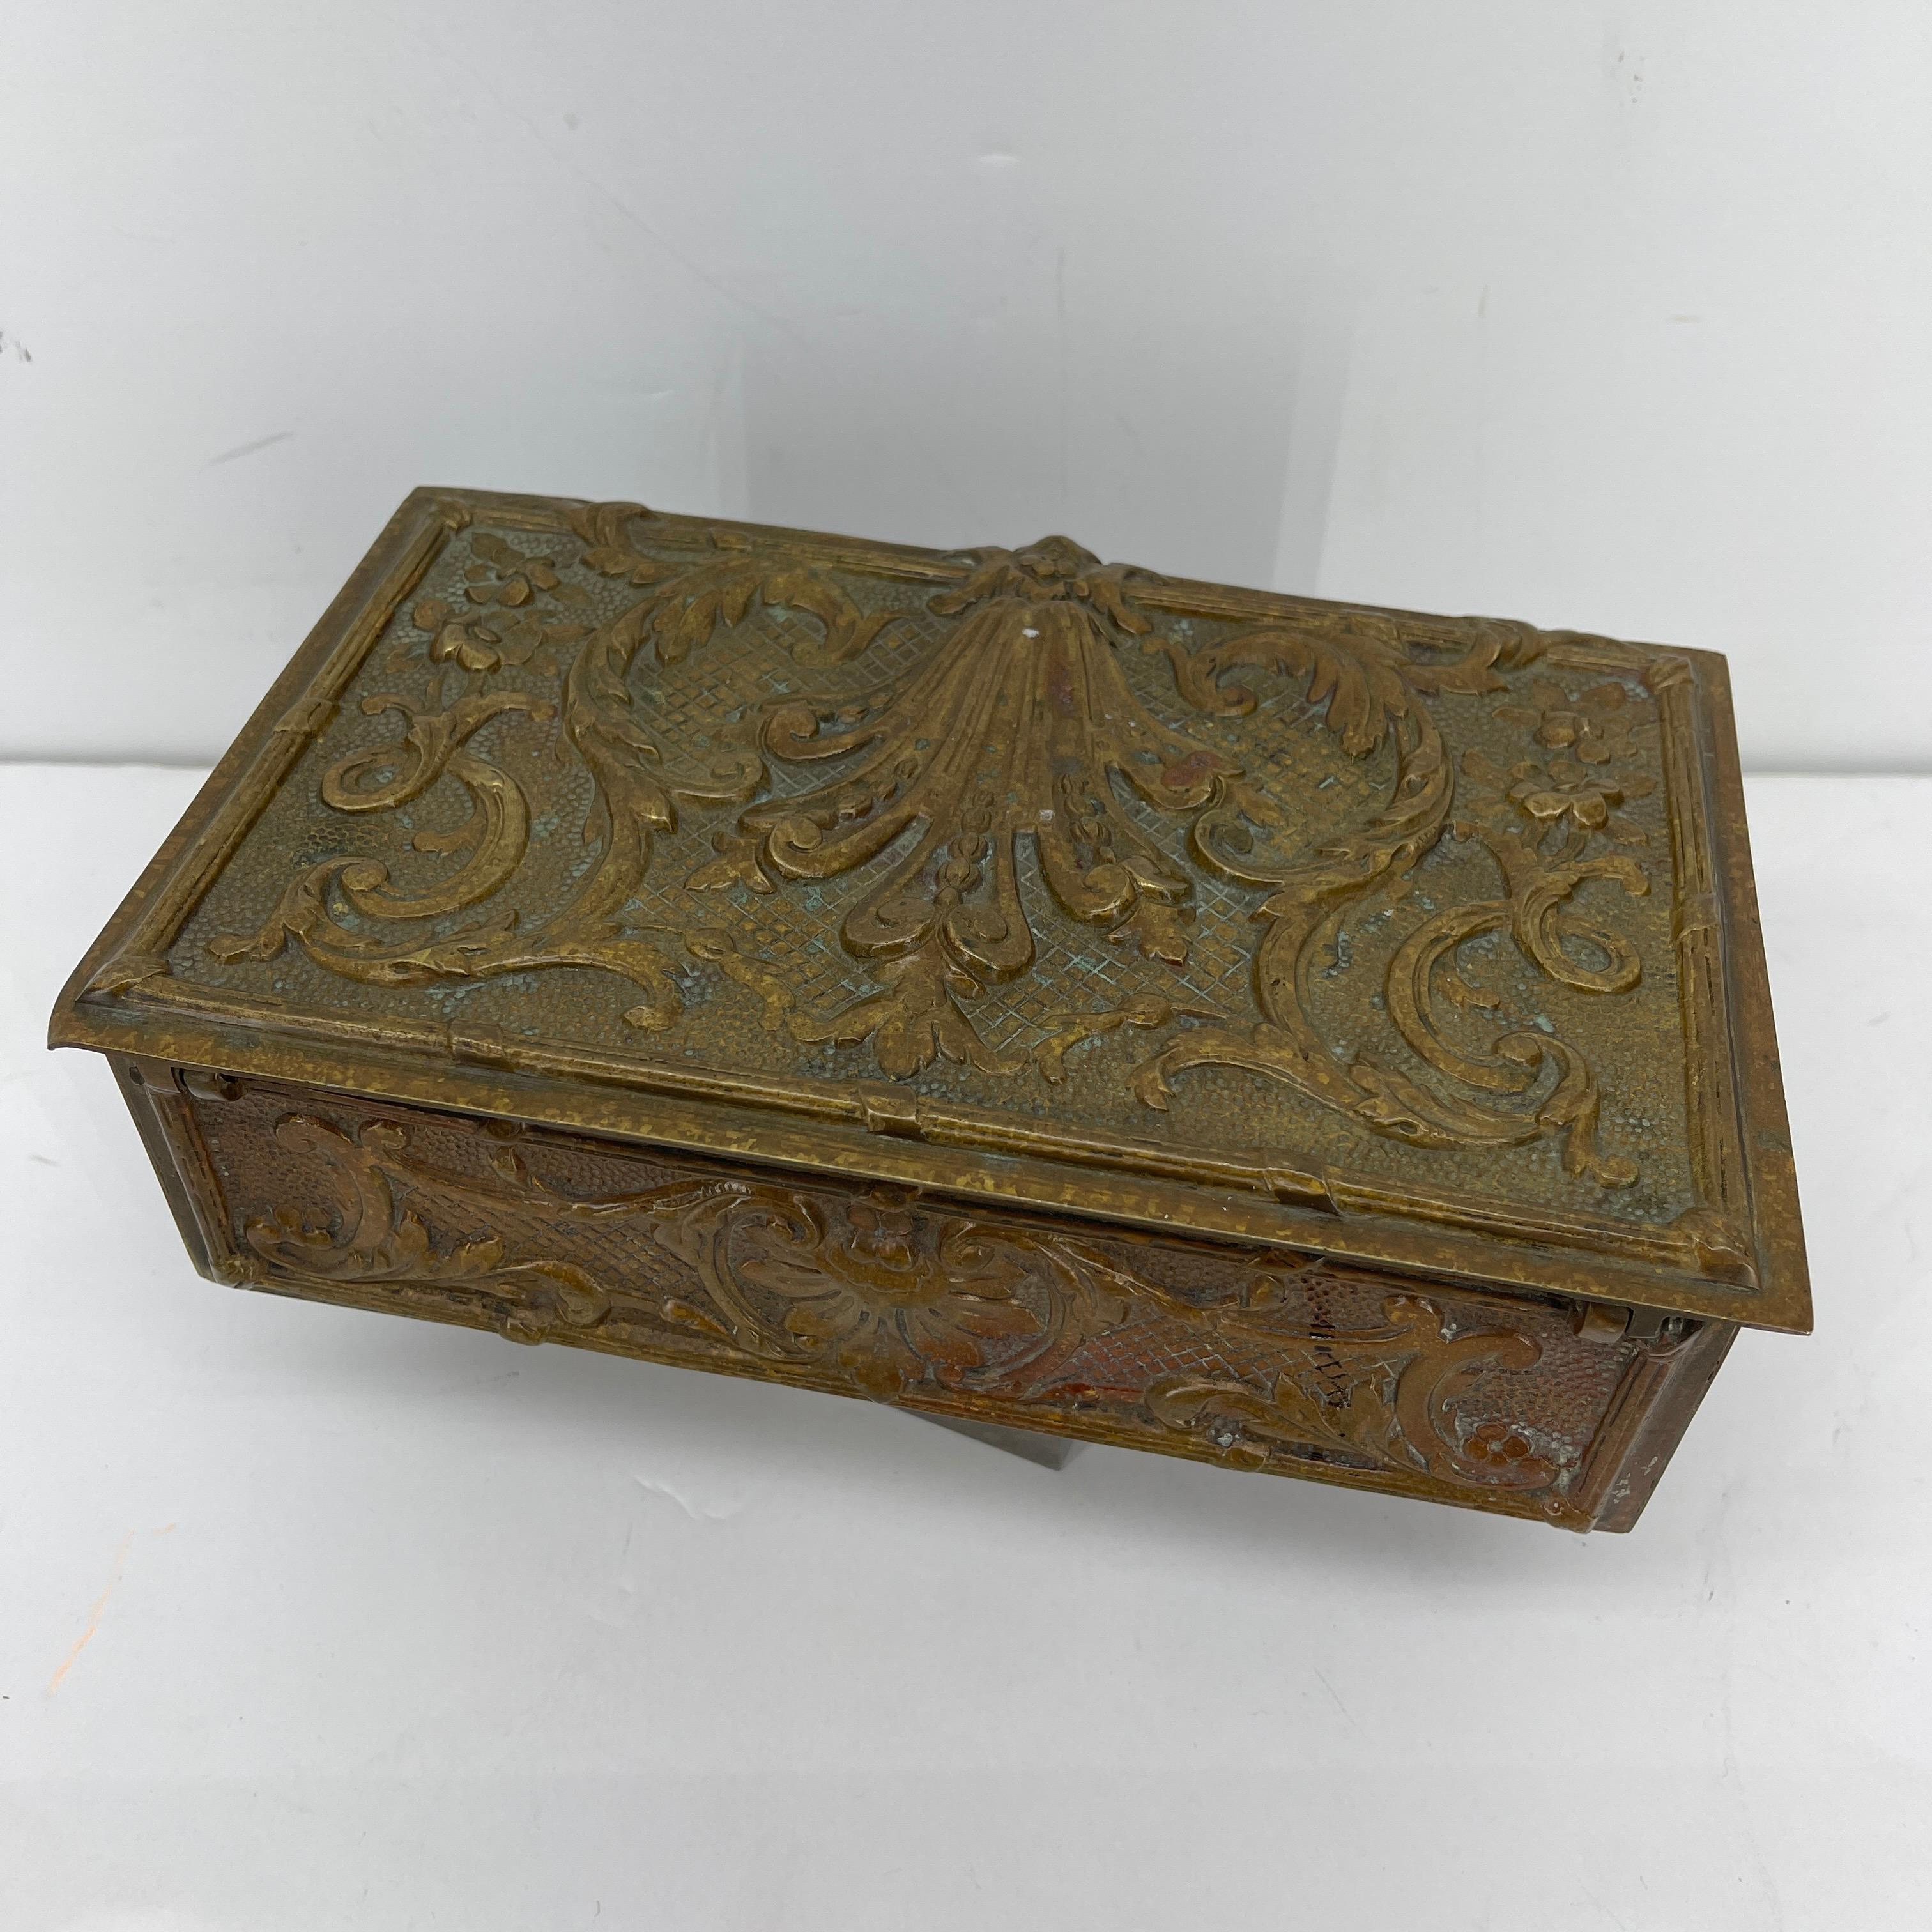 Rare bronze vanity or jewelry box made in Belgium in the early 1900's.
This rectangular bronze box is prominently cast with Rococo decor on all sides and on the lid. The interior is wooden and stamped Made in Belgium. Perfectly sized for a vanity